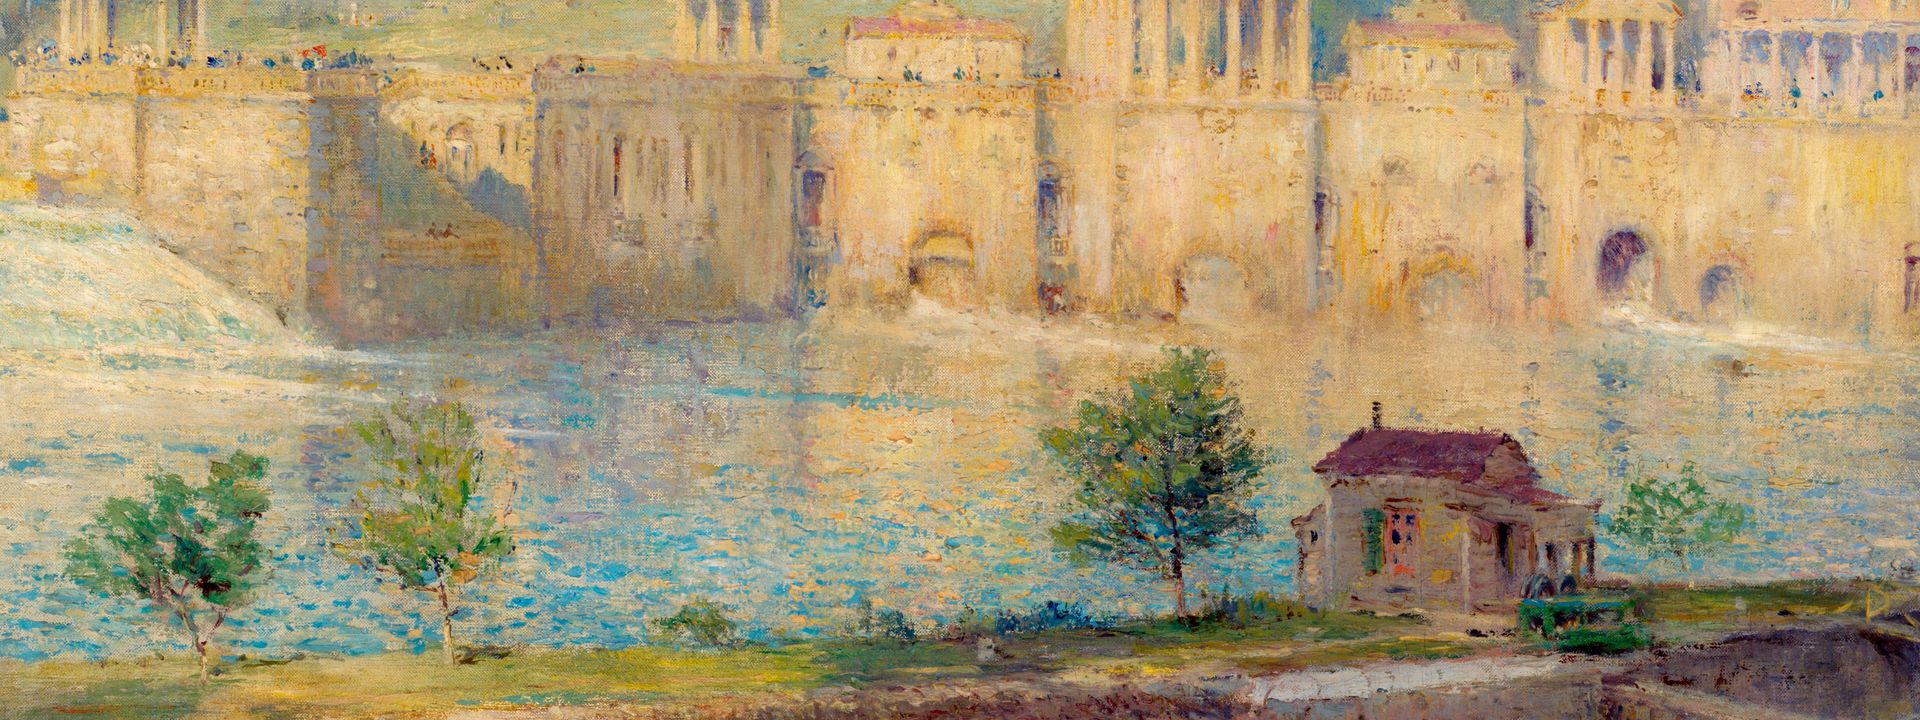 Old Waterworks, Fairmount, 1913, by Colin Campbell Cooper